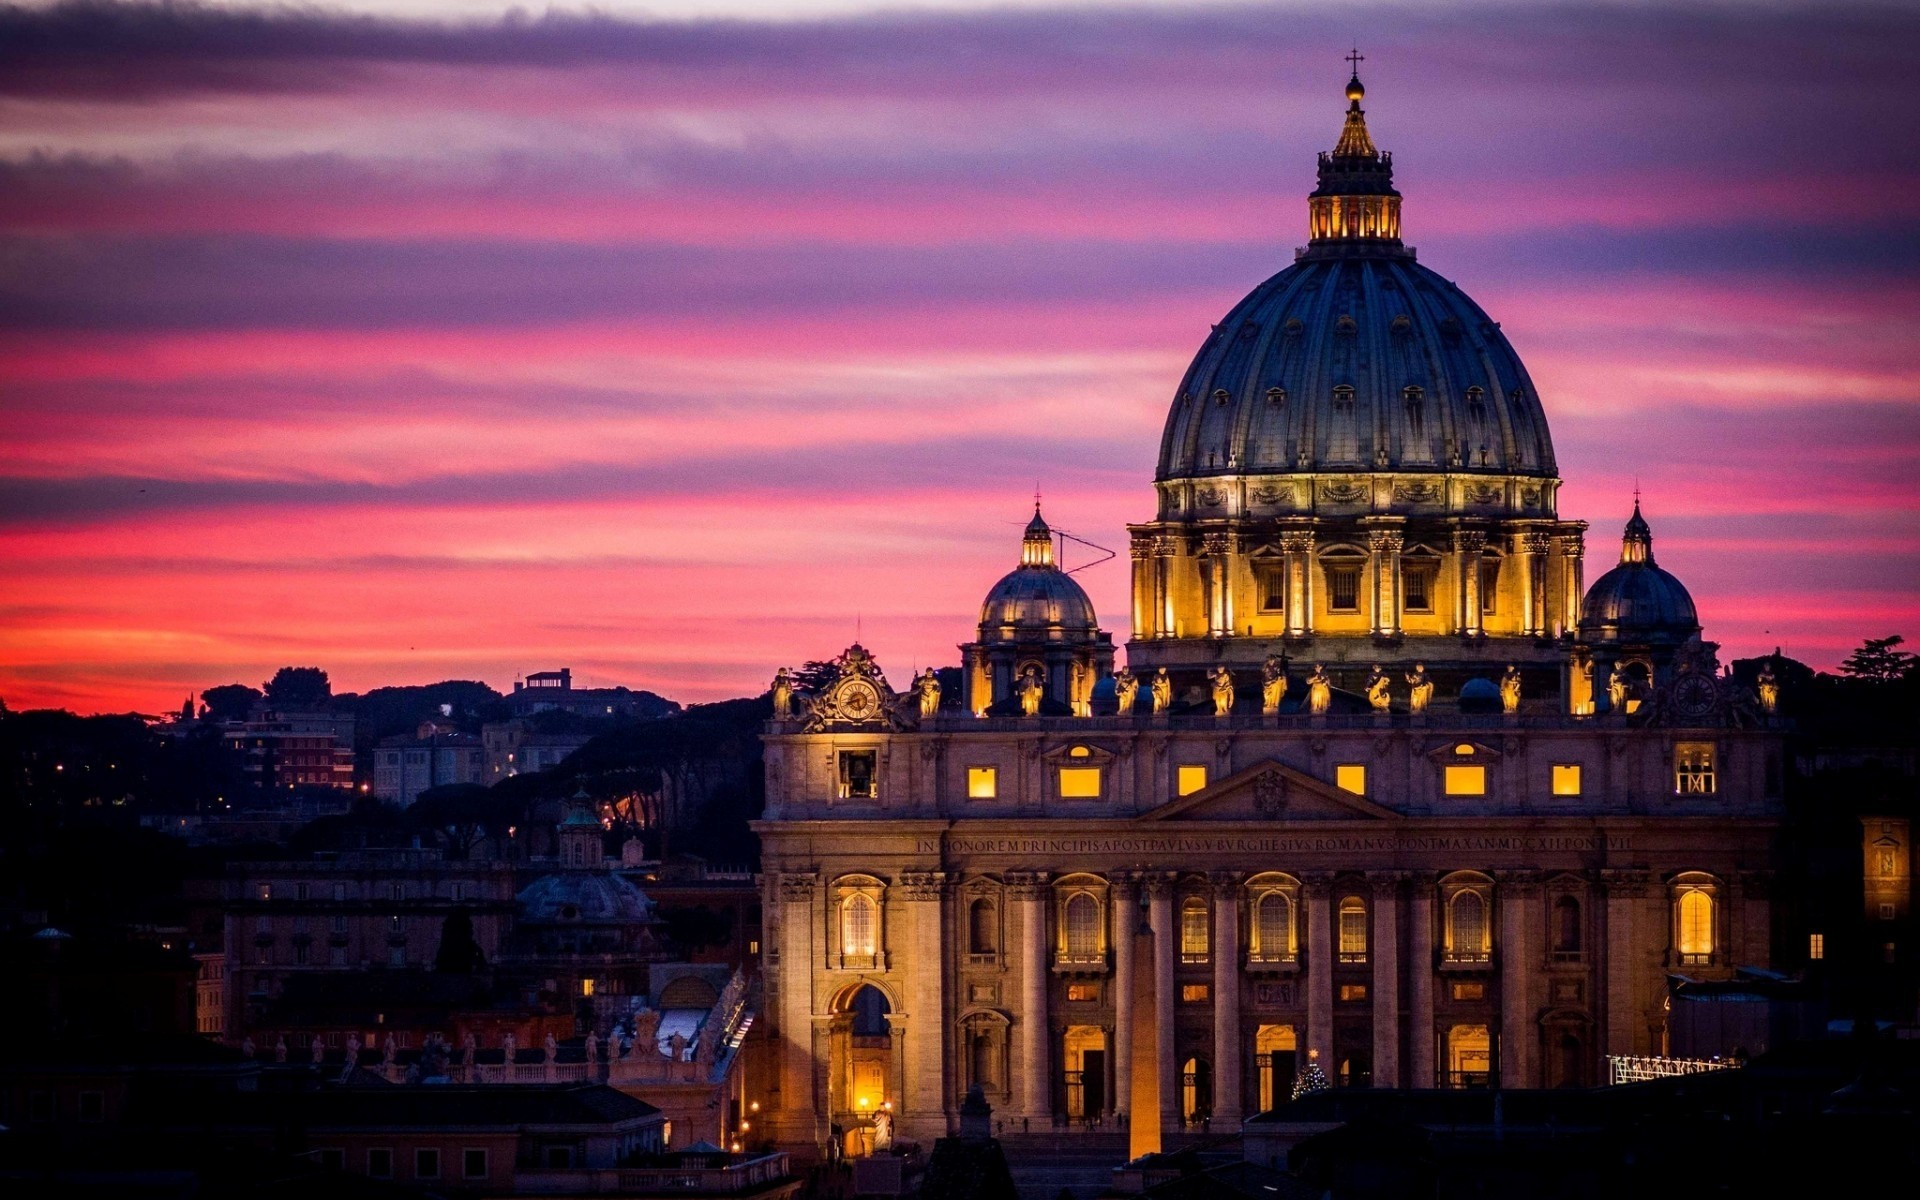 italy architecture dome travel church dusk evening city cathedral building religion sky landmark illuminated outdoors monument sunset cityscape vatican